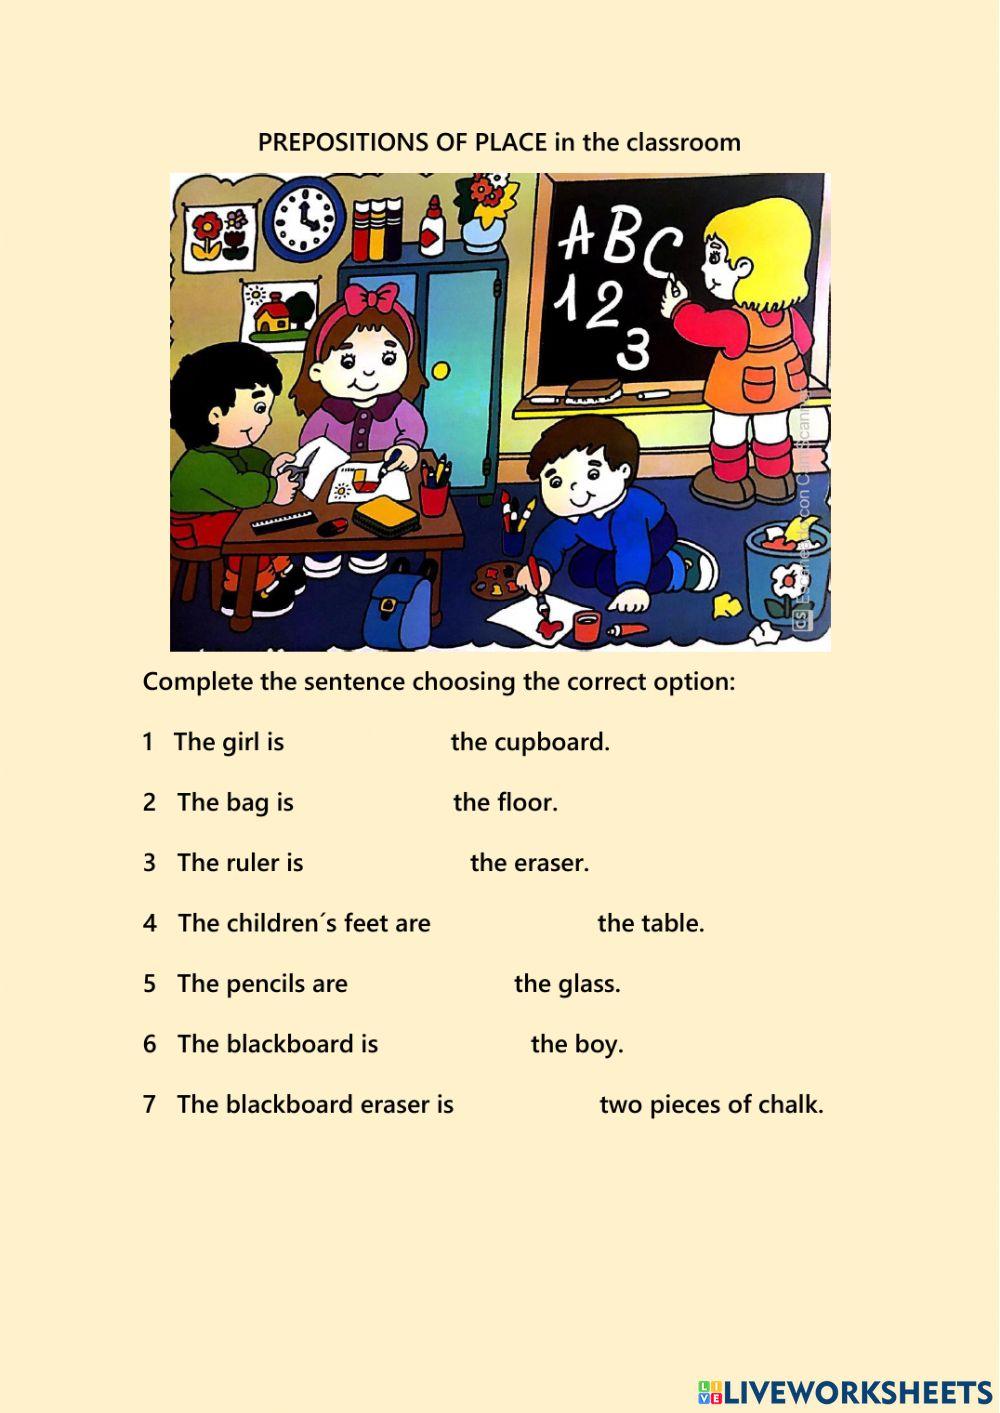 Prepositions in the classroom